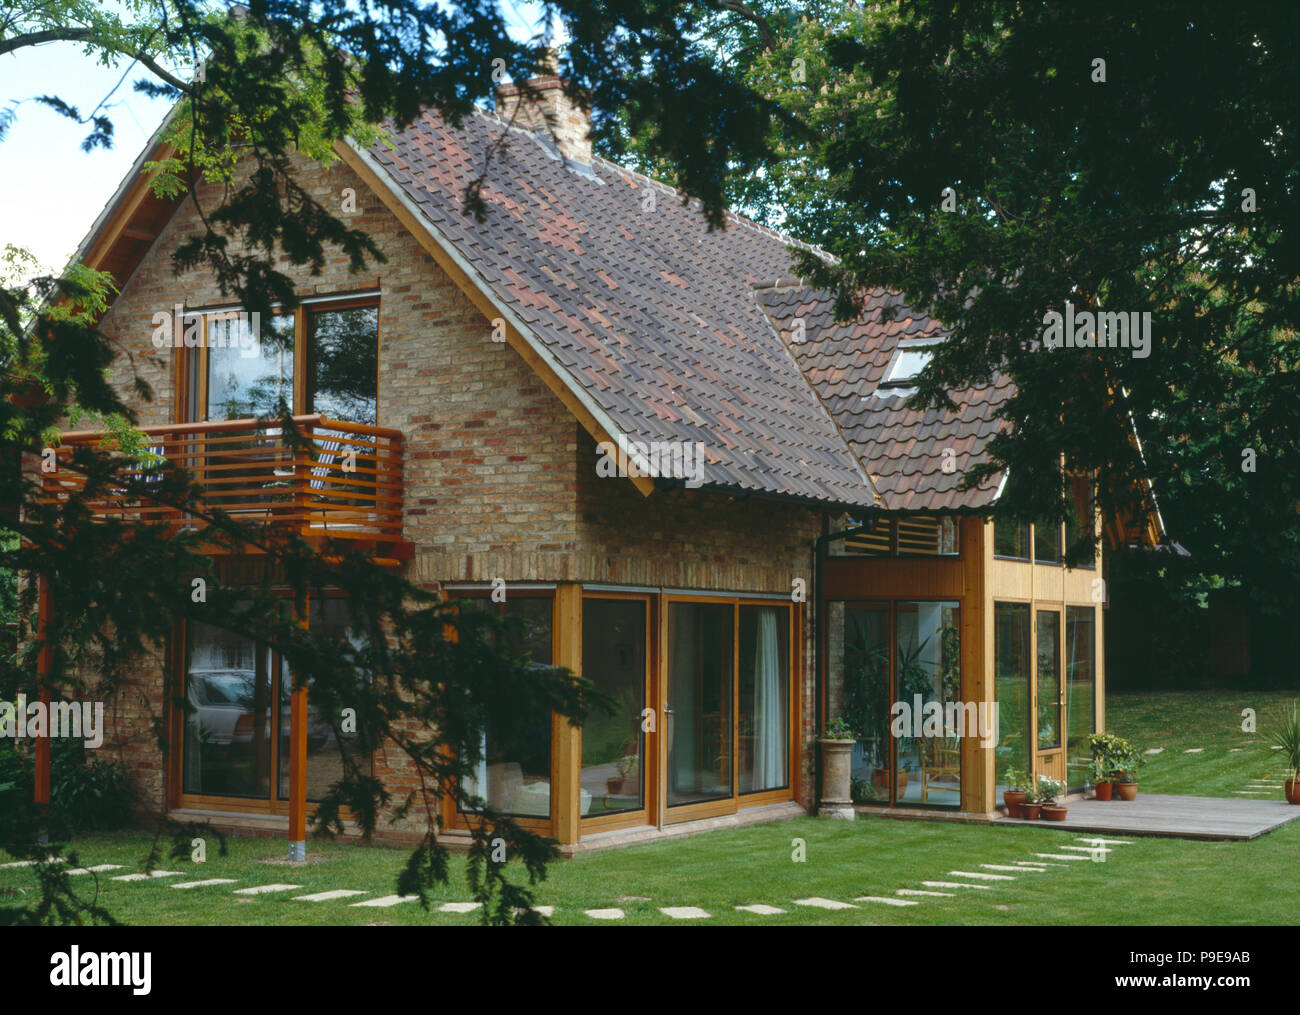 Modern country house with reclaimed roof pantiles and wooden balcony Stock Photo